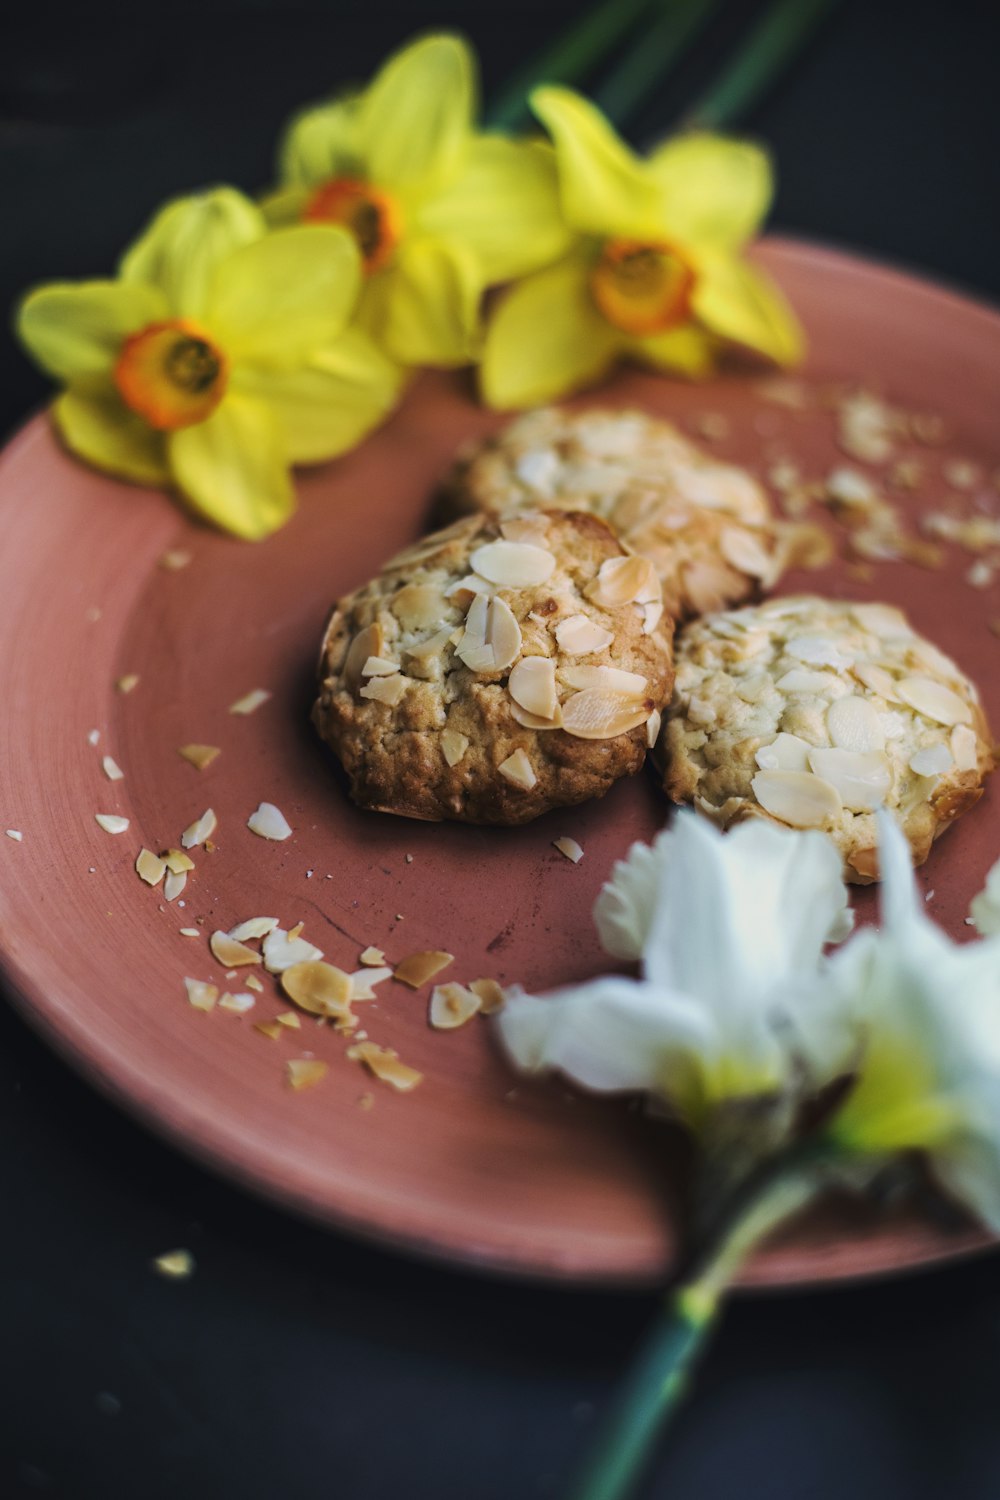 oatmeal cookies and daffodil flowers on plate